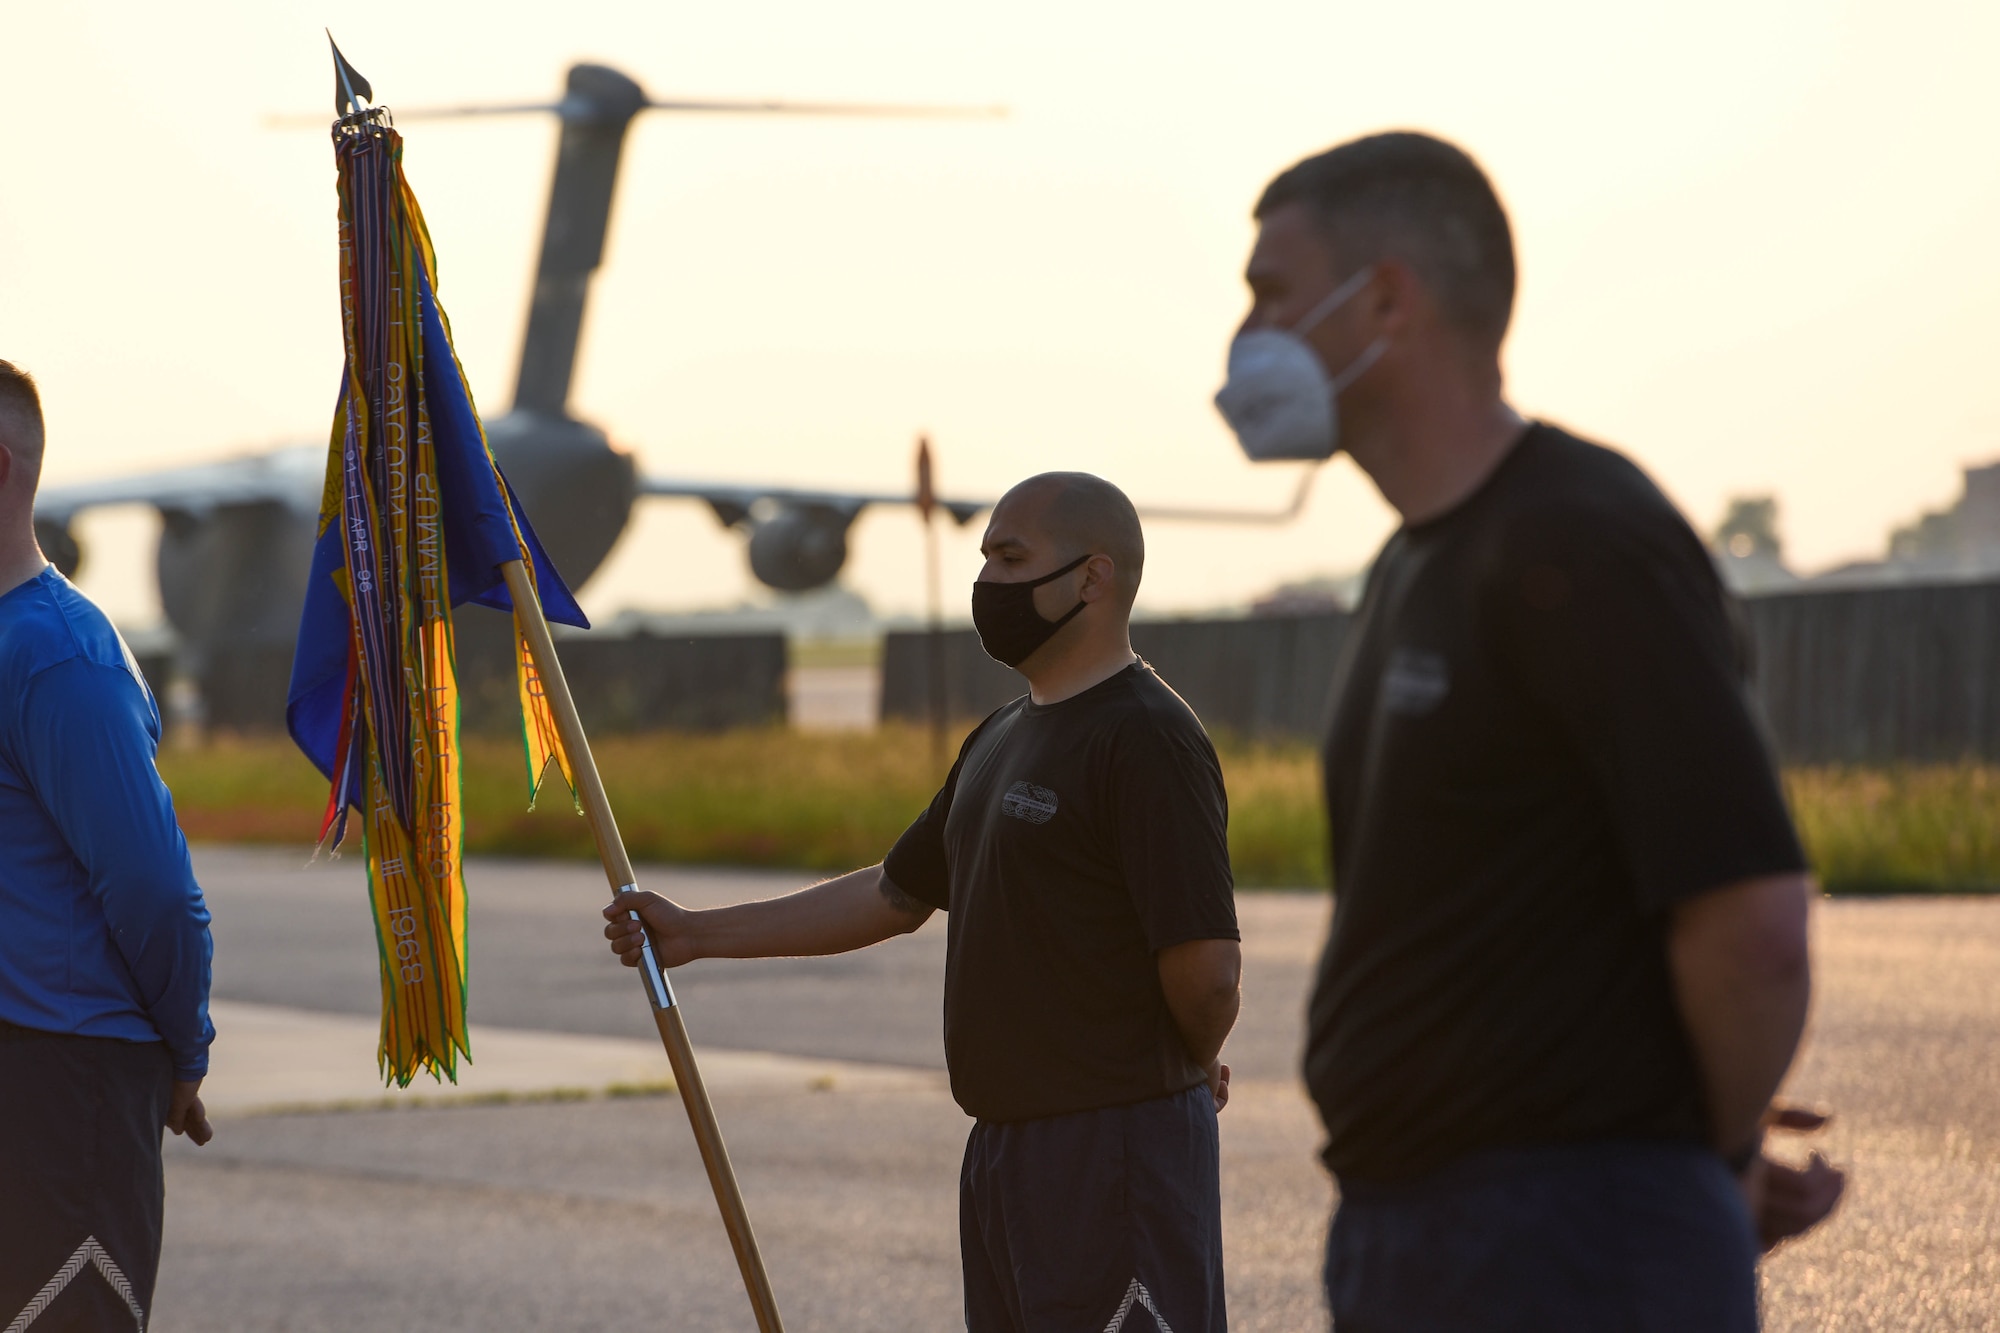 Airmen assigned to the 724th Aircraft Maintenance Squadron stand in formation before a Port Dawg’ memorial run at Aviano Air Base, Italy, May 27, 2021. The memorial run is held annually throughout the career field as a way to honor members that have fallen while serving as a ‘Port Dawg.’ The event is an opportunity to highlight the importance of the Port Dawgs in the AMS installations and community. (U.S. Air Force photo by Airman 1st Class Brooke Moeder)